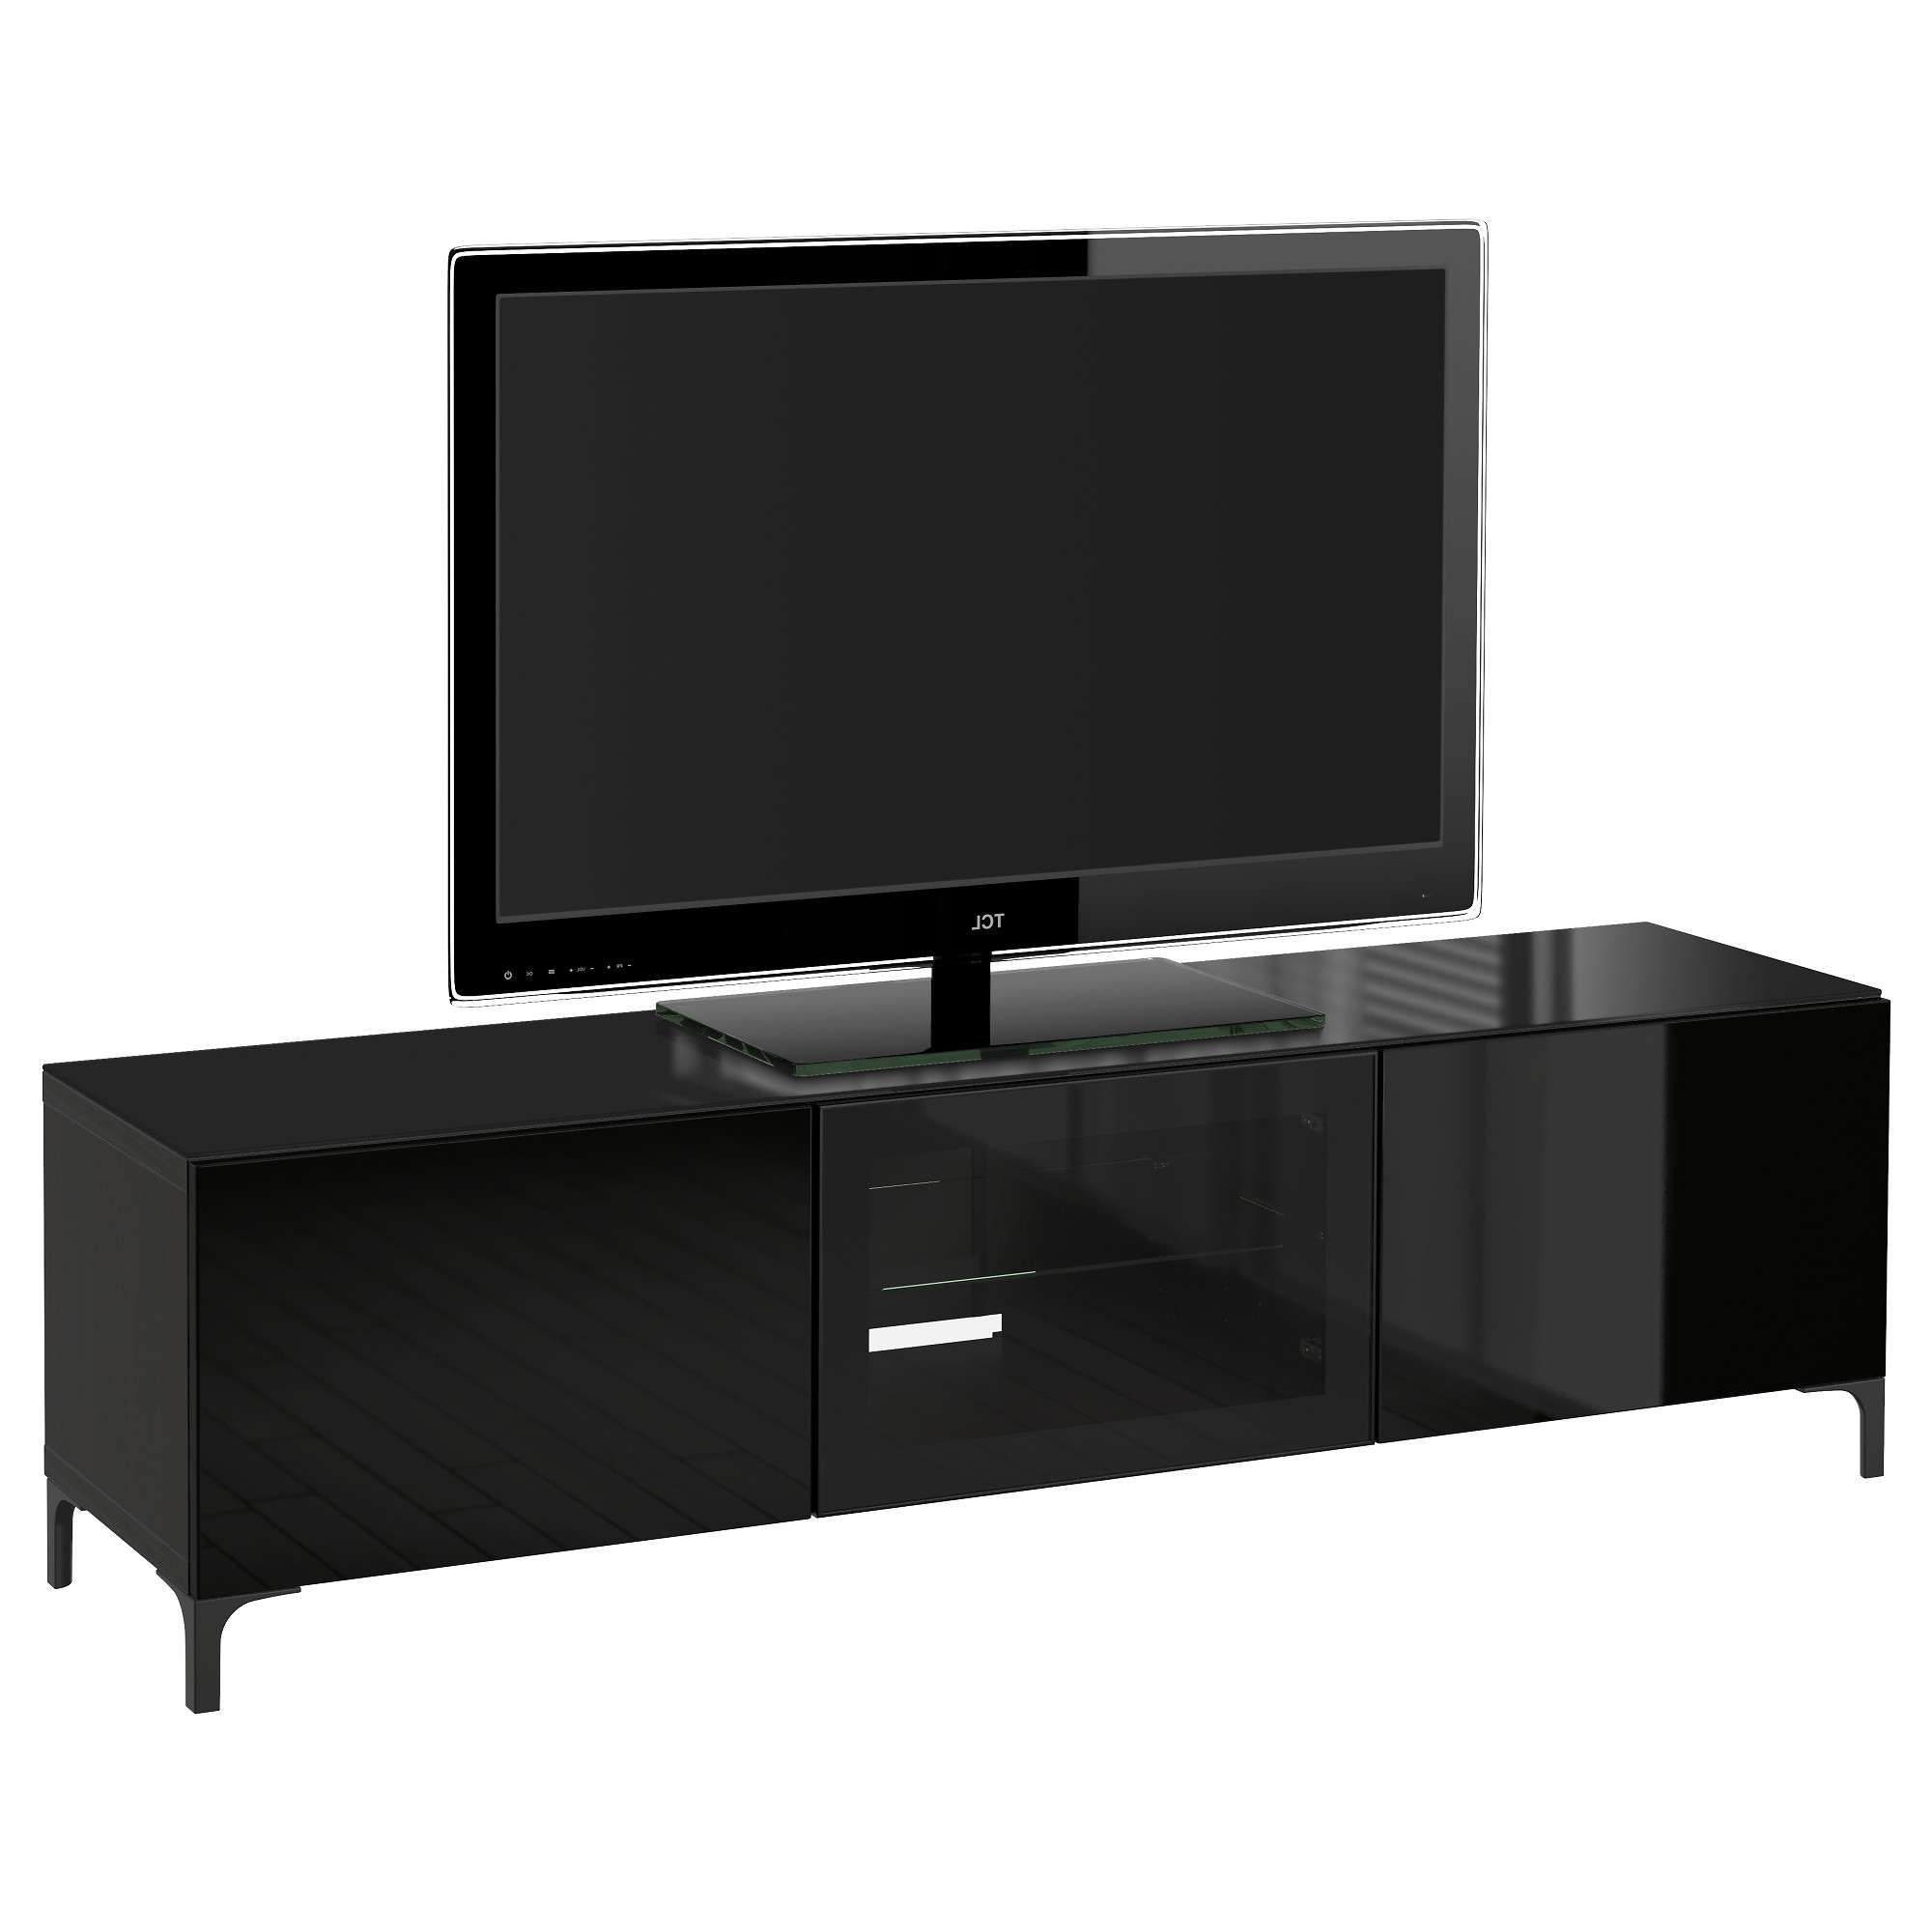 Tv Stands & Entertainment Centers – Ikea With Regard To Black Glass Tv Cabinets (View 10 of 20)